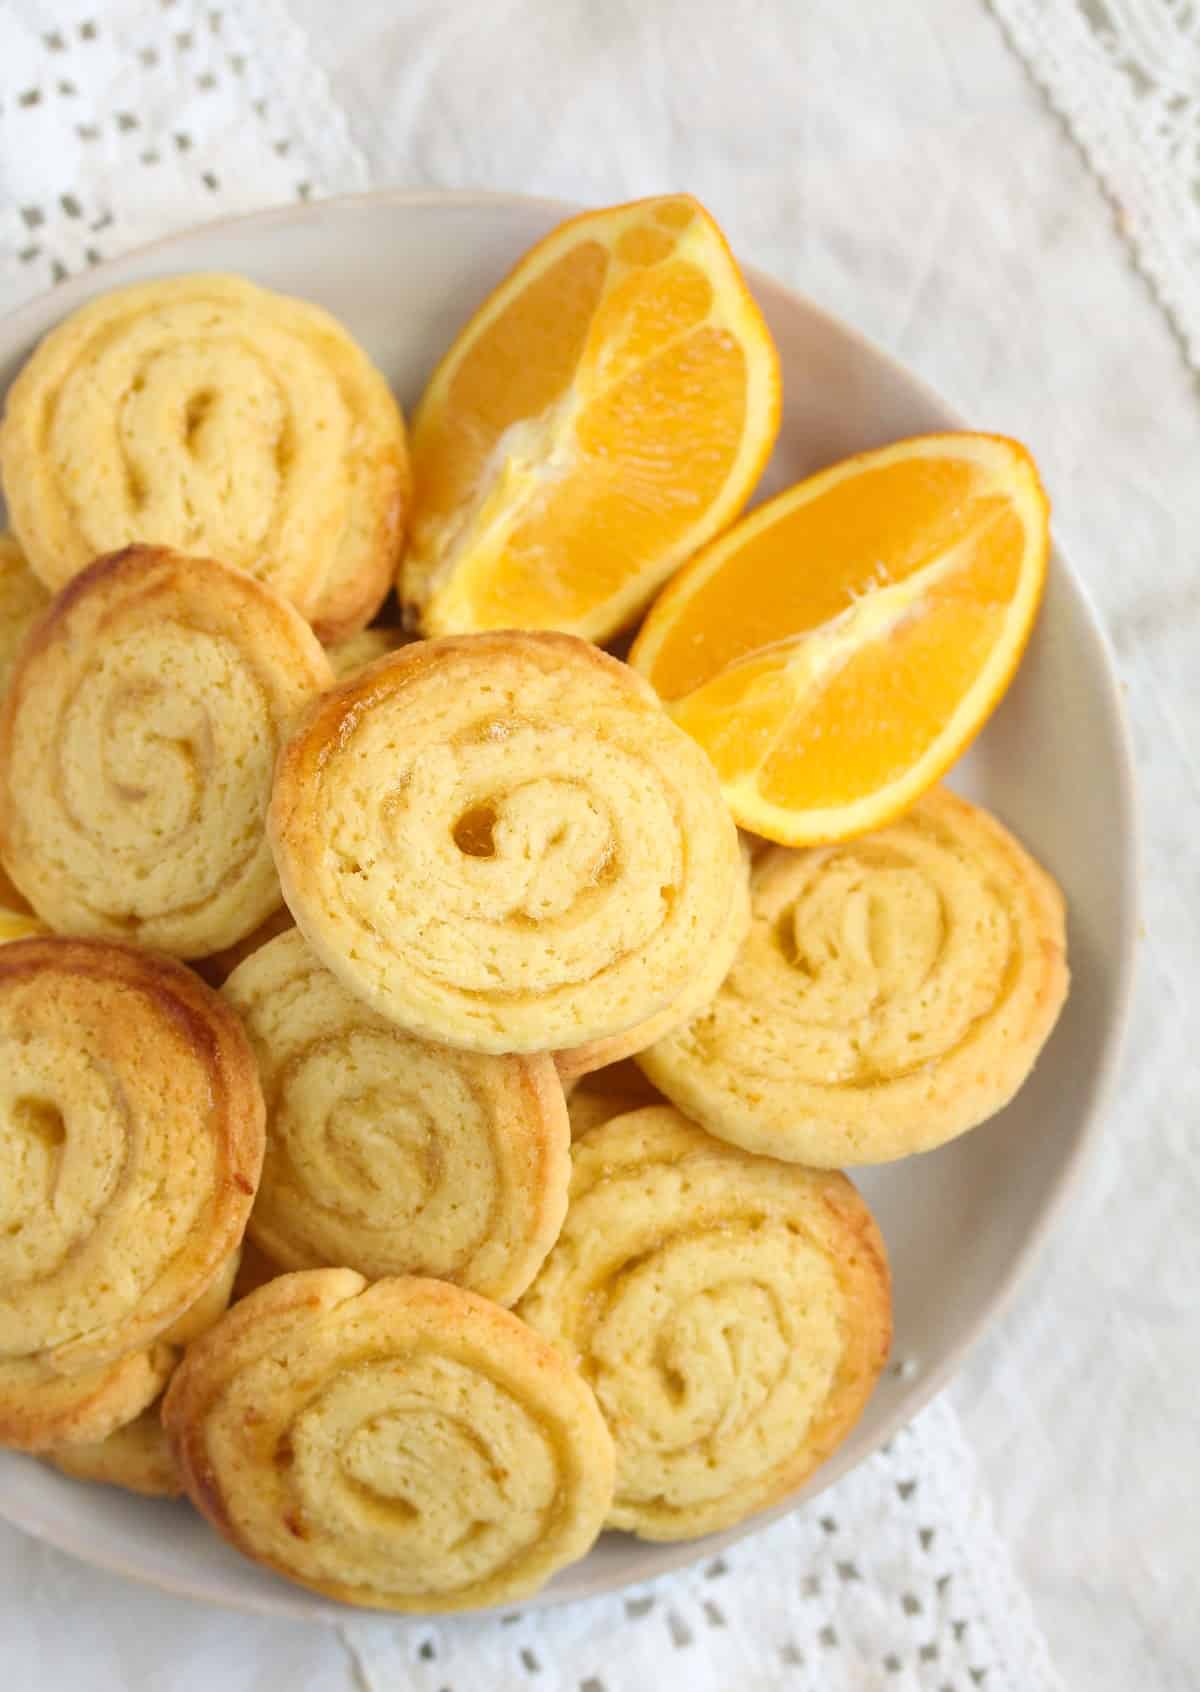 swirl cookies filled with orange jam and two orange wedges on a plate.